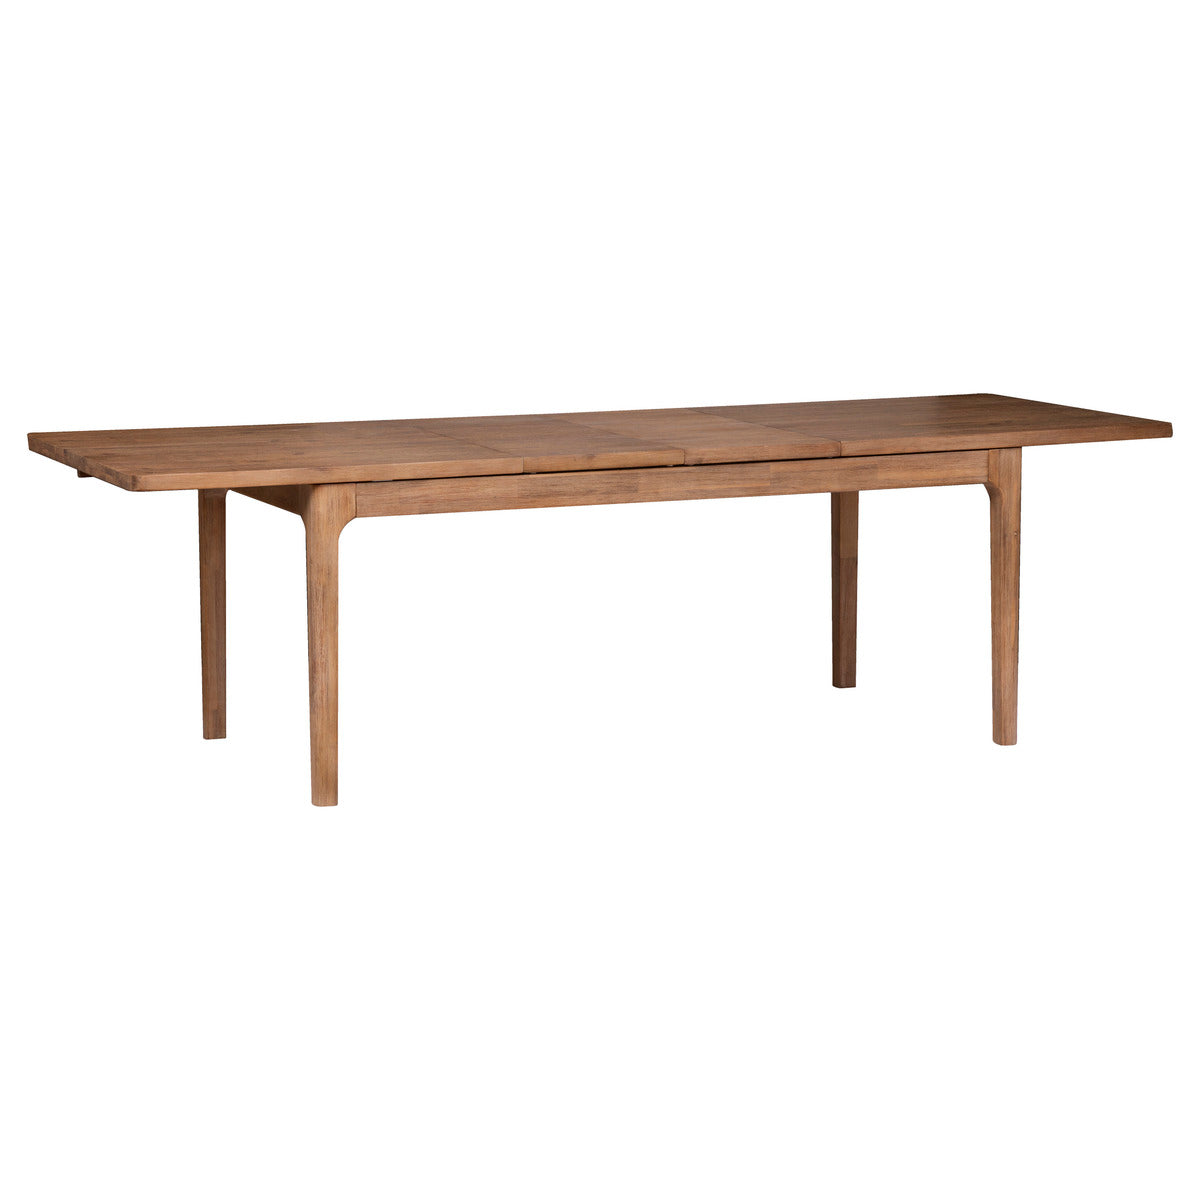 BEAU Indra acacia extendable dining table - L180-260xD90xH76cm - Brown